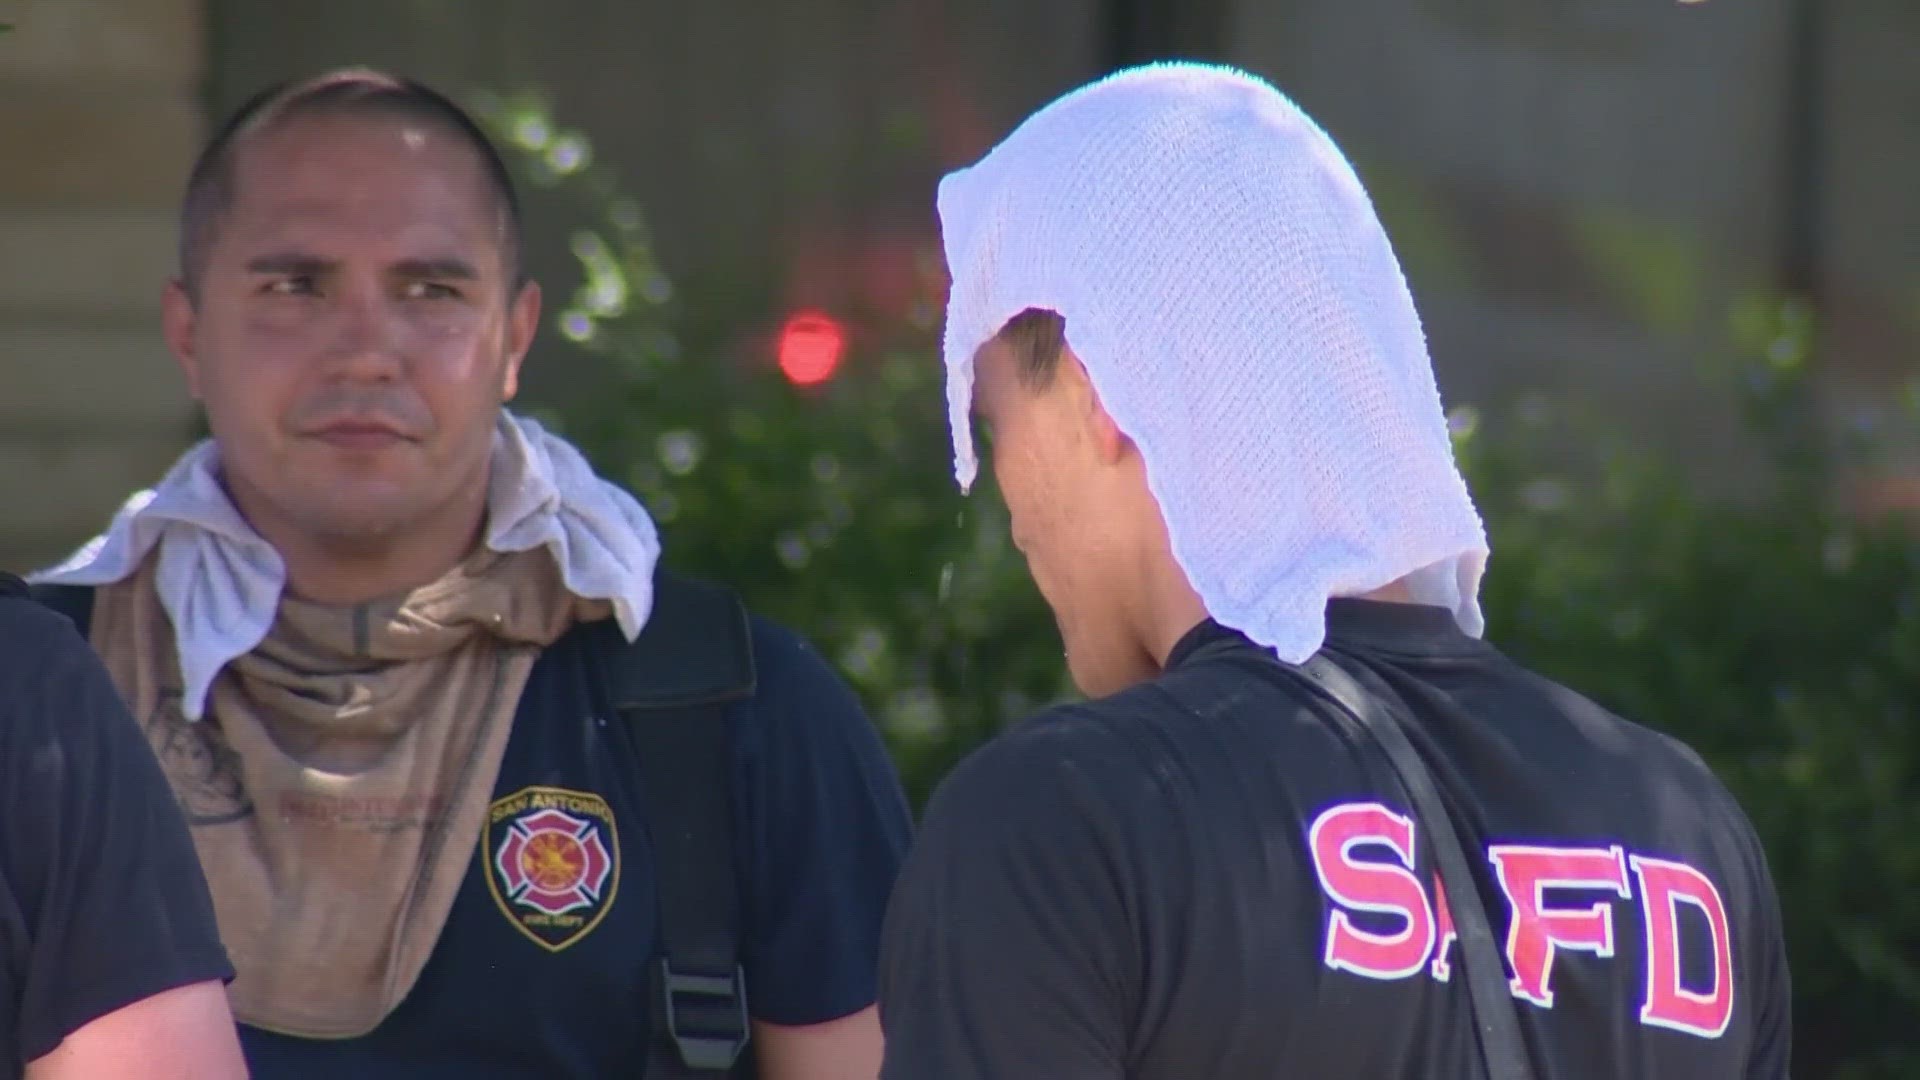 SAFD's job of battling blazes has gotten harder due to extreme temperatures. Their tips on dealing with the heat could save your life.